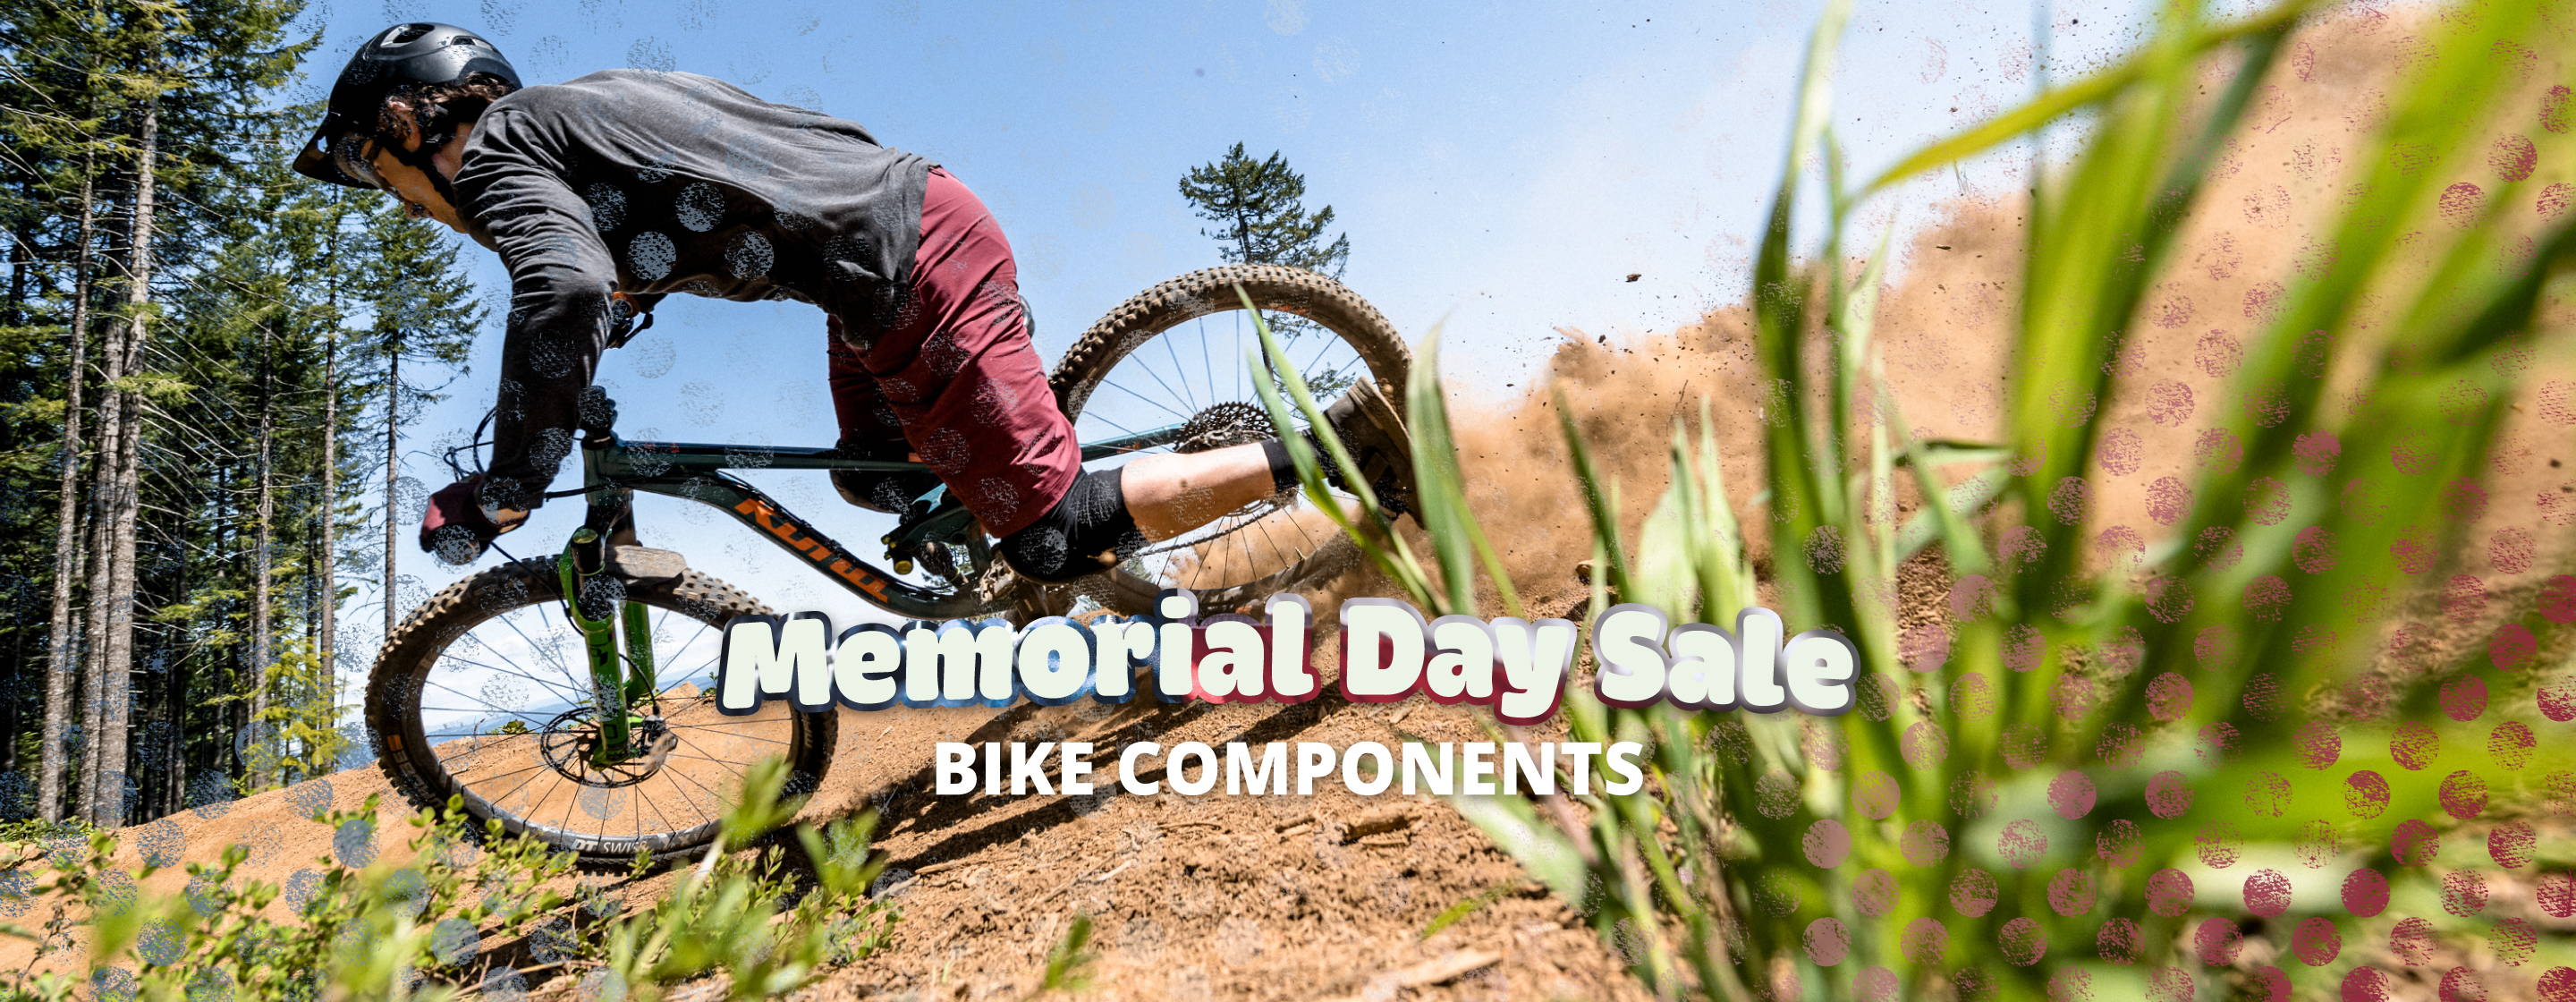 memorial day sale: bike components